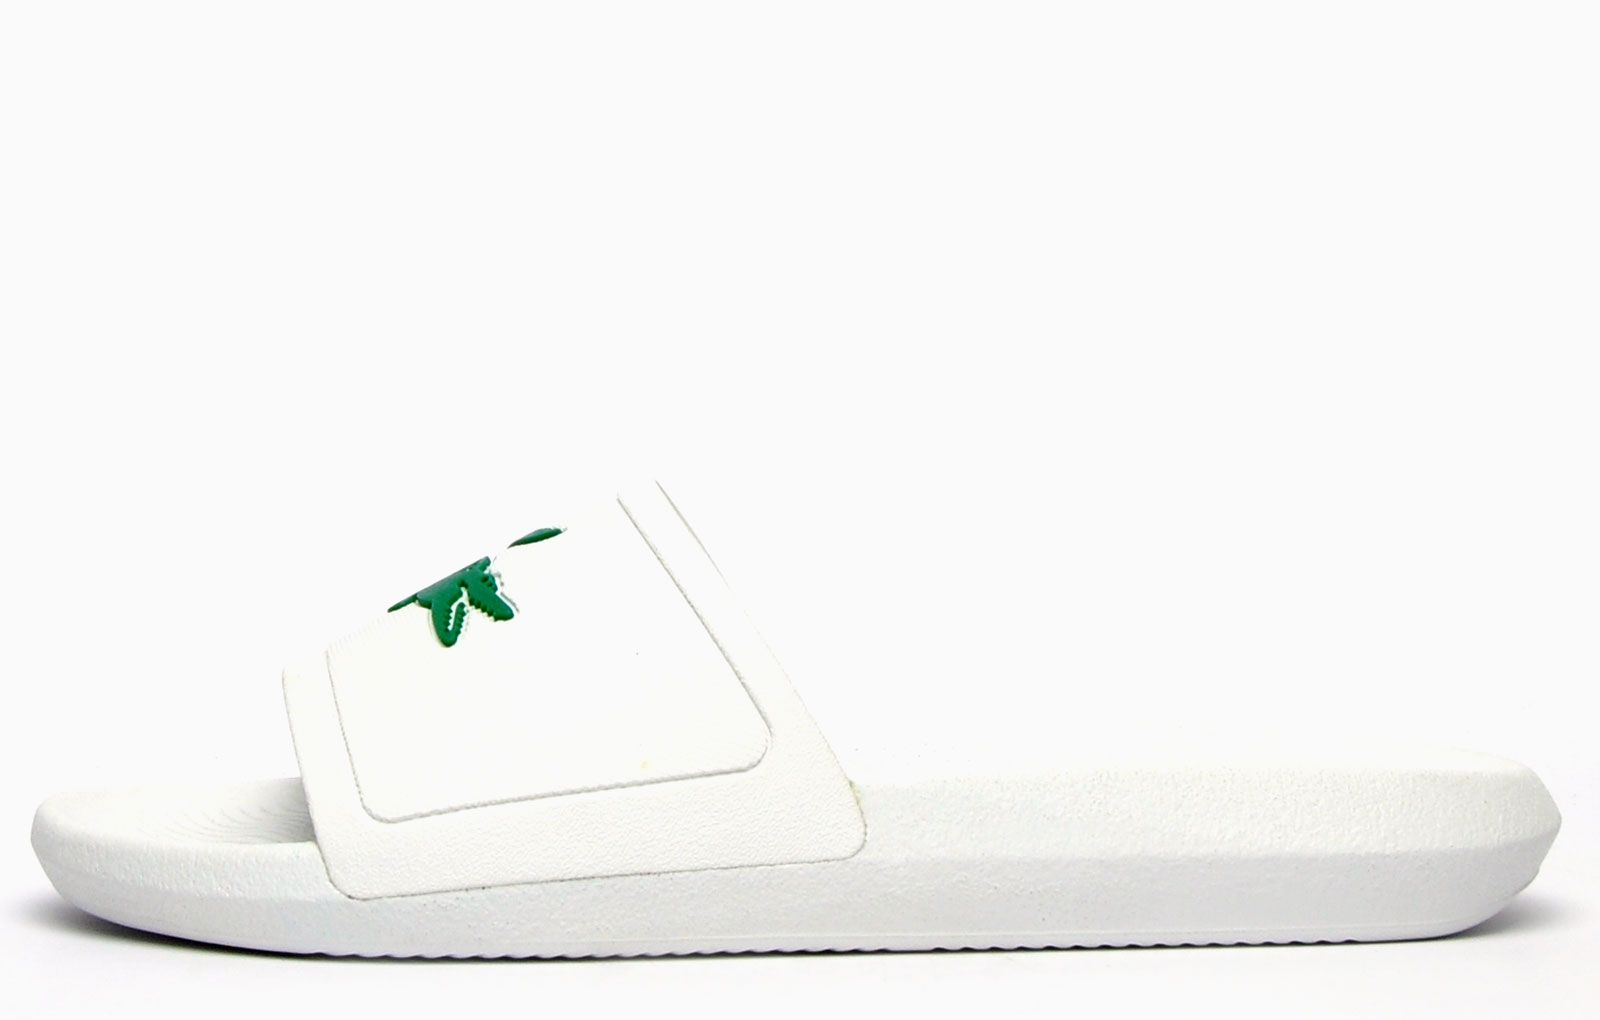 Head to the beach in style with these mens Lacoste Croco Slides. These on-trend sandals are crafted with comfort in mind whilst boasting a great water resistant super comfy footbed for a great fit and feel for the pool side and everyday wear. These designer slides are finished with eye catching Lacoste branding throughout just in case you want a sign of approval that youre wearing cool on trend style this summer season
 
 - Stylish synthetic upper
 - Comfort moulded footbed
 - Grippy outsole
 - Slip on wear
 - Iconic Lacoste branding throughout
 Please Note: These slides are supplied poly bagged (without box)
 These Lacoste Slides are sold as B grades which means there may be some very slight cosmetic issues on the shoe and they come in a poly bag. There could be occasional issues with wrong swing tags being allocated to wrong shoes by Lacoste themselves which could result in some size confusion but you must take the size IN THE SHOE as the size that the shoe actually is ( not what is on the tag ). We have checked most of the shoes and in our opinion,all are practically perfect without any blemishes on them at all and in essence if the shoes did not have the letter B denoted on the swing tag you would presume these were perfect shoes. All shoes are guaranteed against fair wear and tear and offer a substantial saving against the normal high street price. The overall function or performance of the shoe will not be affected by any minor cosmetic issues. B Grades are original authentic products released by the brand manufacturer with their approval at greatly reduced prices. If you are unhappy with your purchase, we will be more than happy to take the shoes back from you and issue a full refund